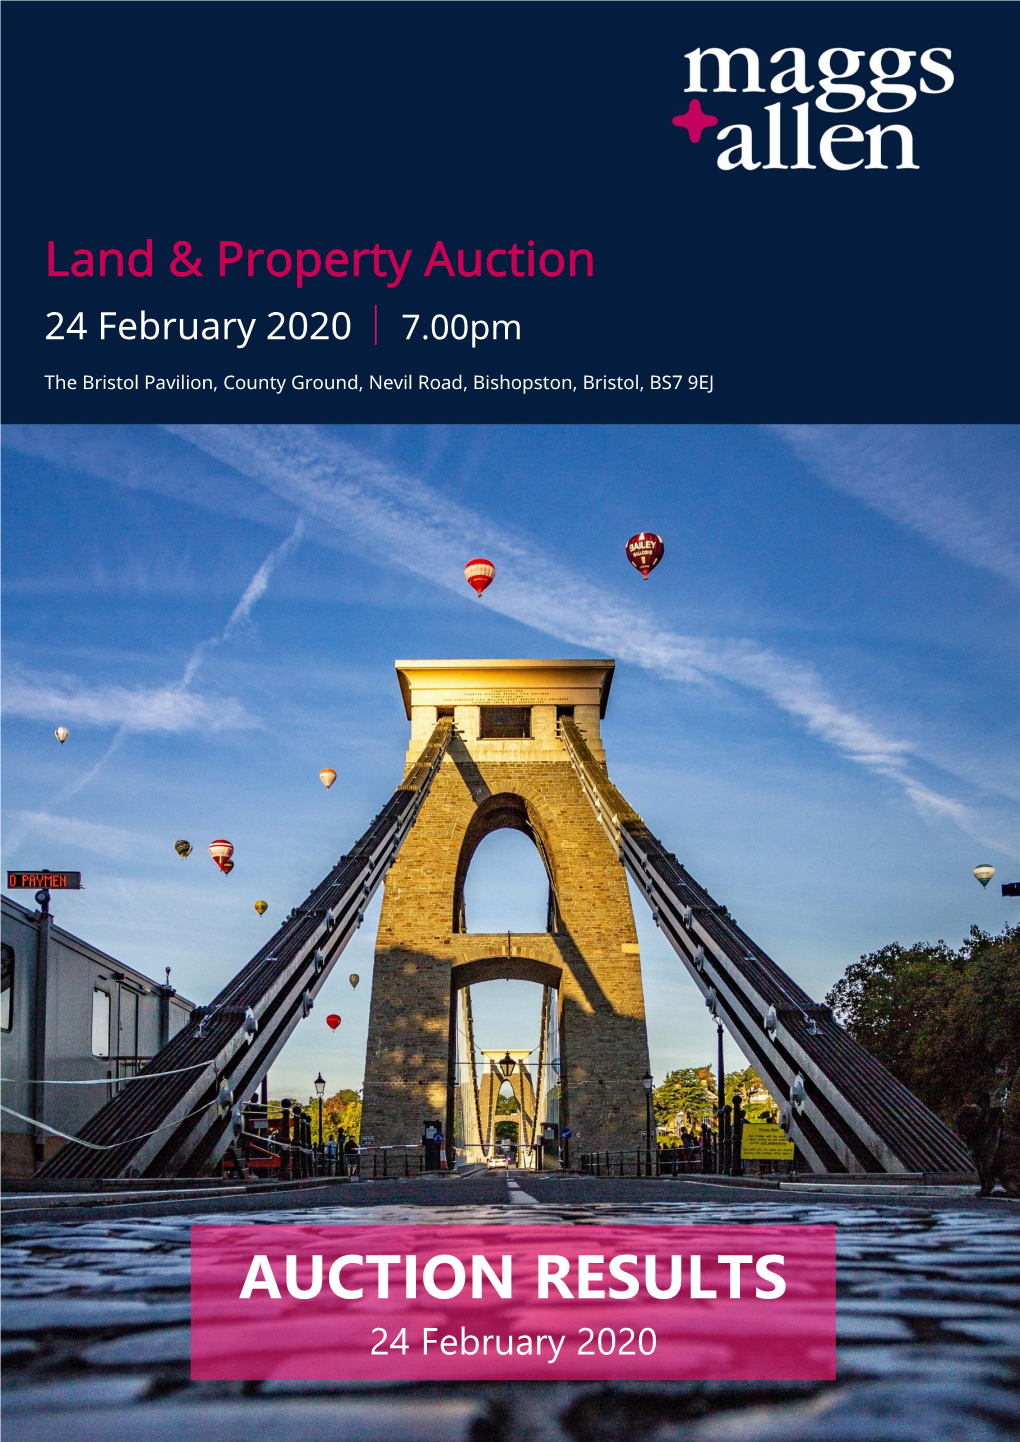 AUCTION RESULTS 24 February 2020